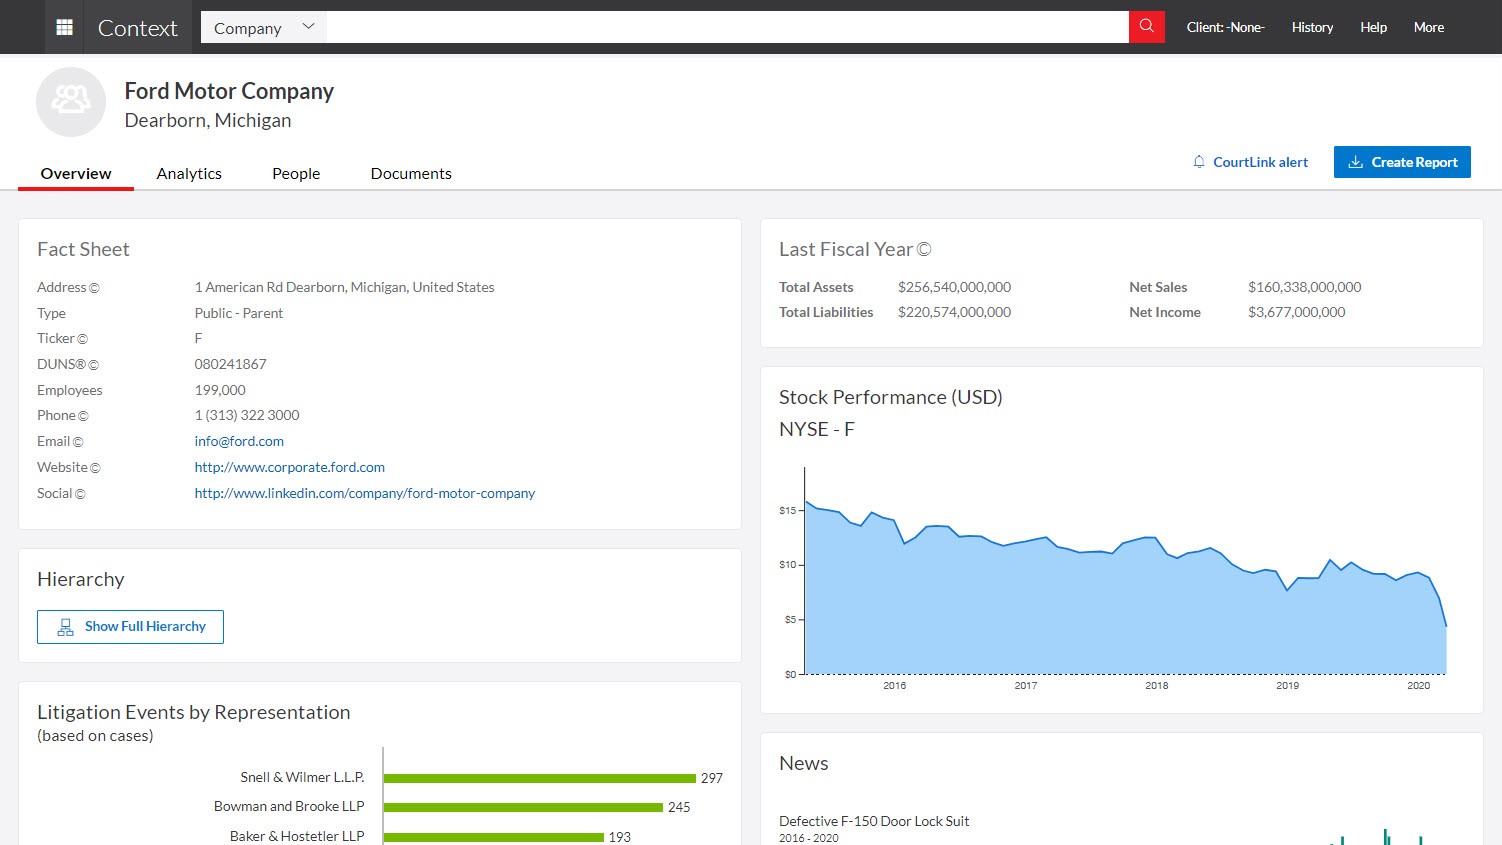 LexisNexis Adds Companies to its Context Analytics on Lexis Advance